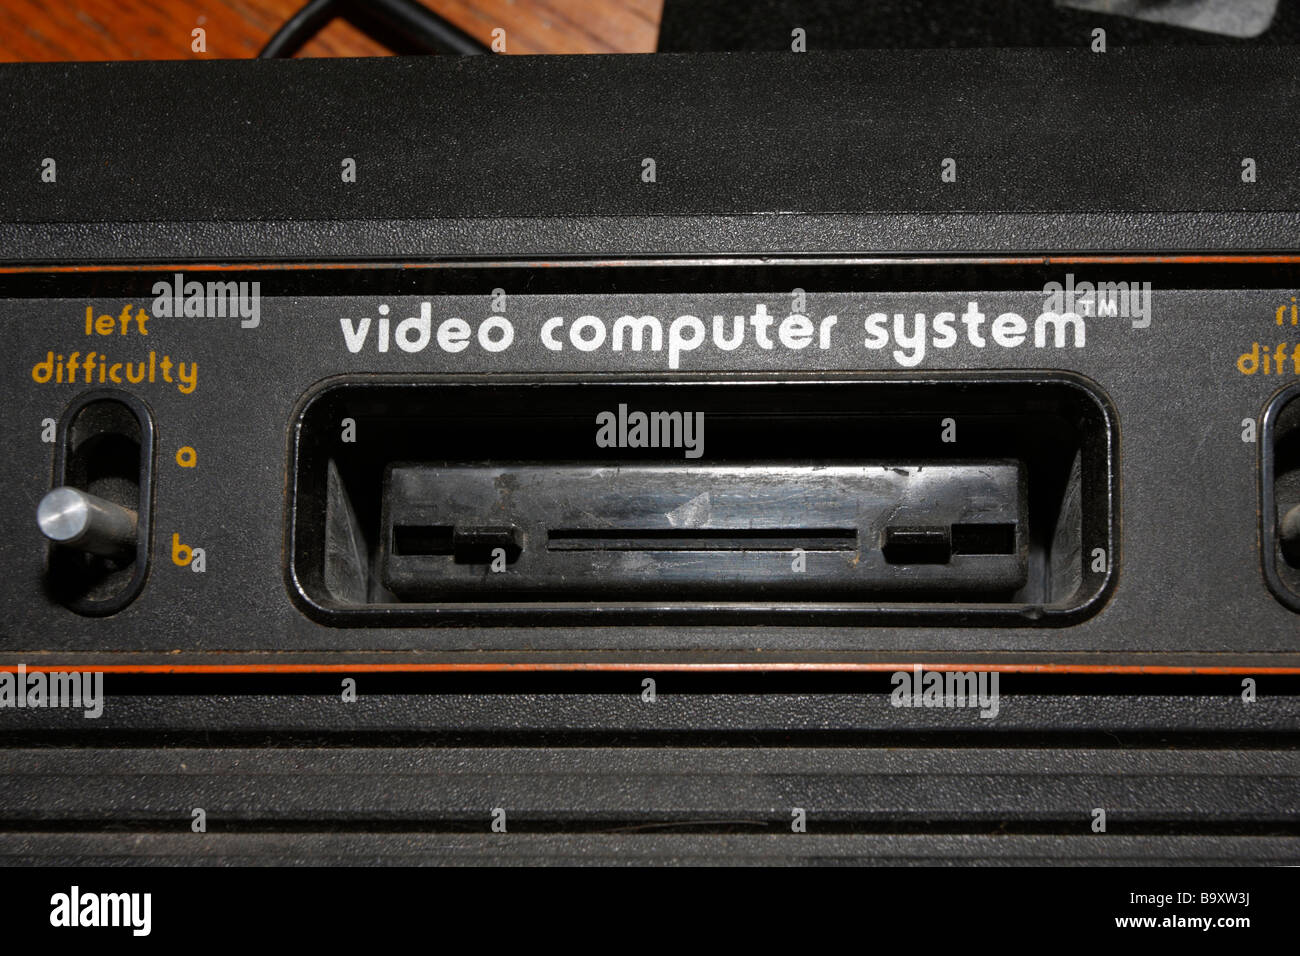 Atari video game console video computer system cartridge opening and difficulty selector switch. Stock Photo